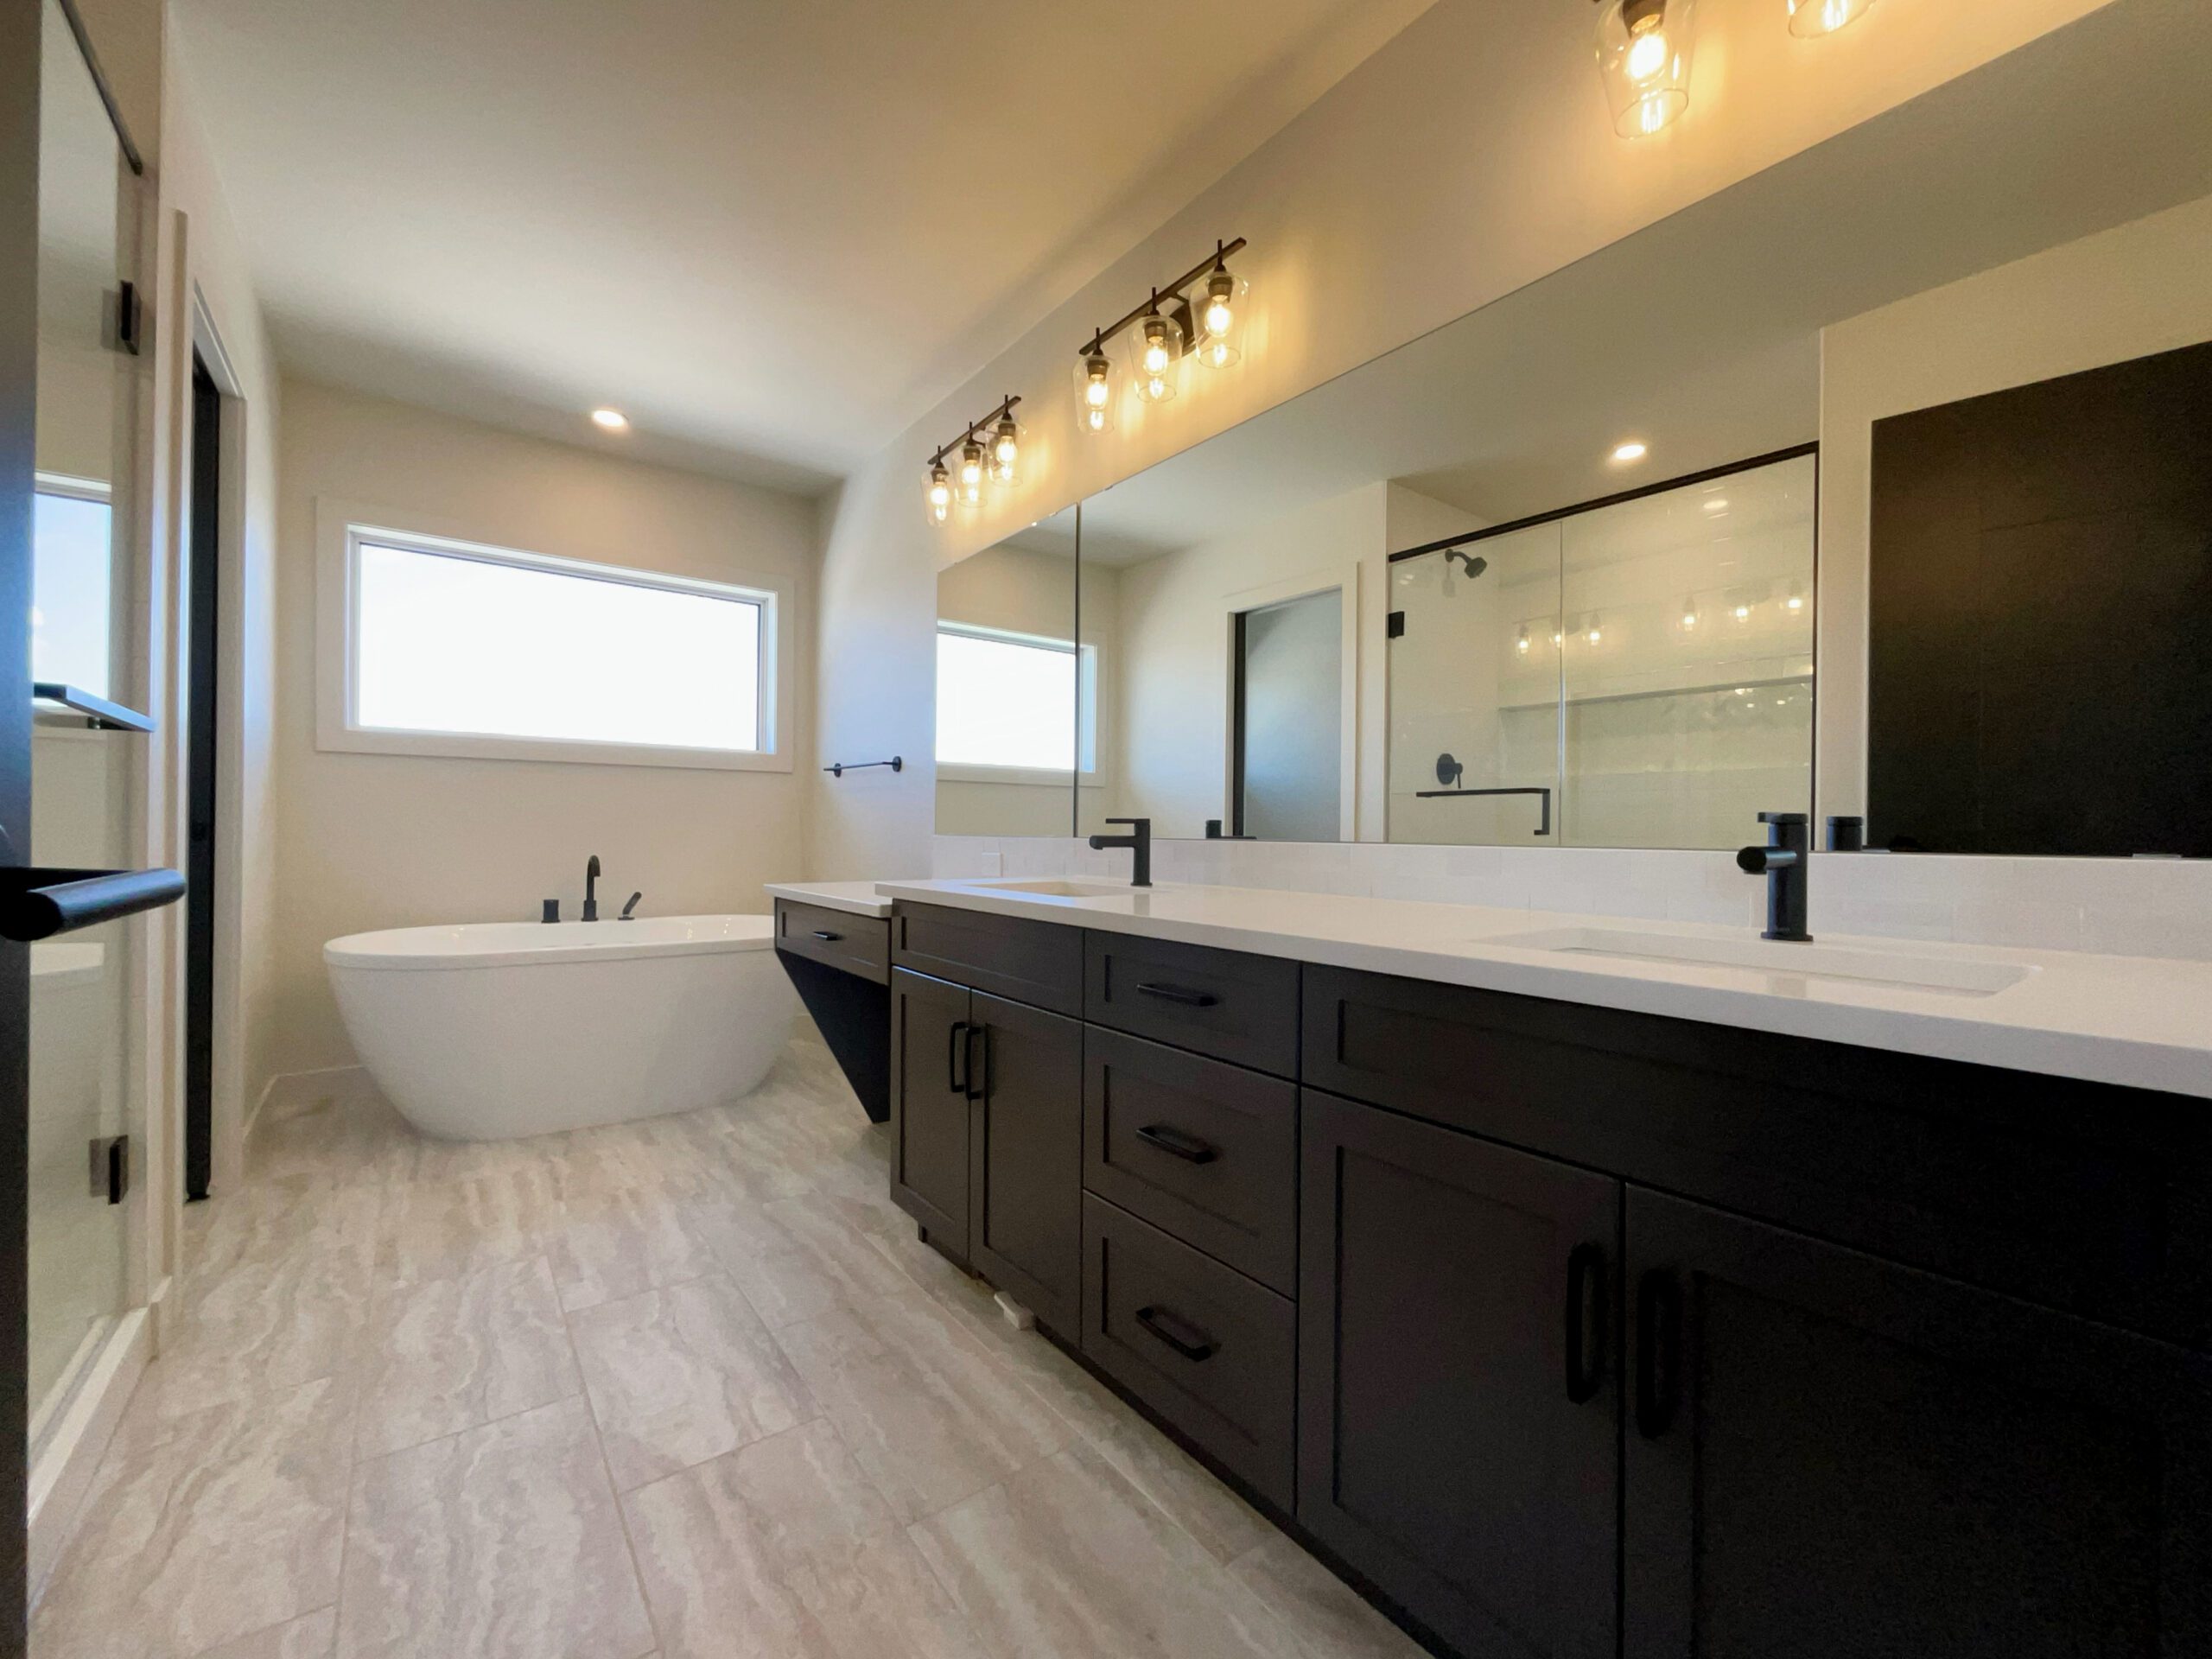 The large primary bathroom with a freestanding tub, double sinks, walk-in shower and mirror.